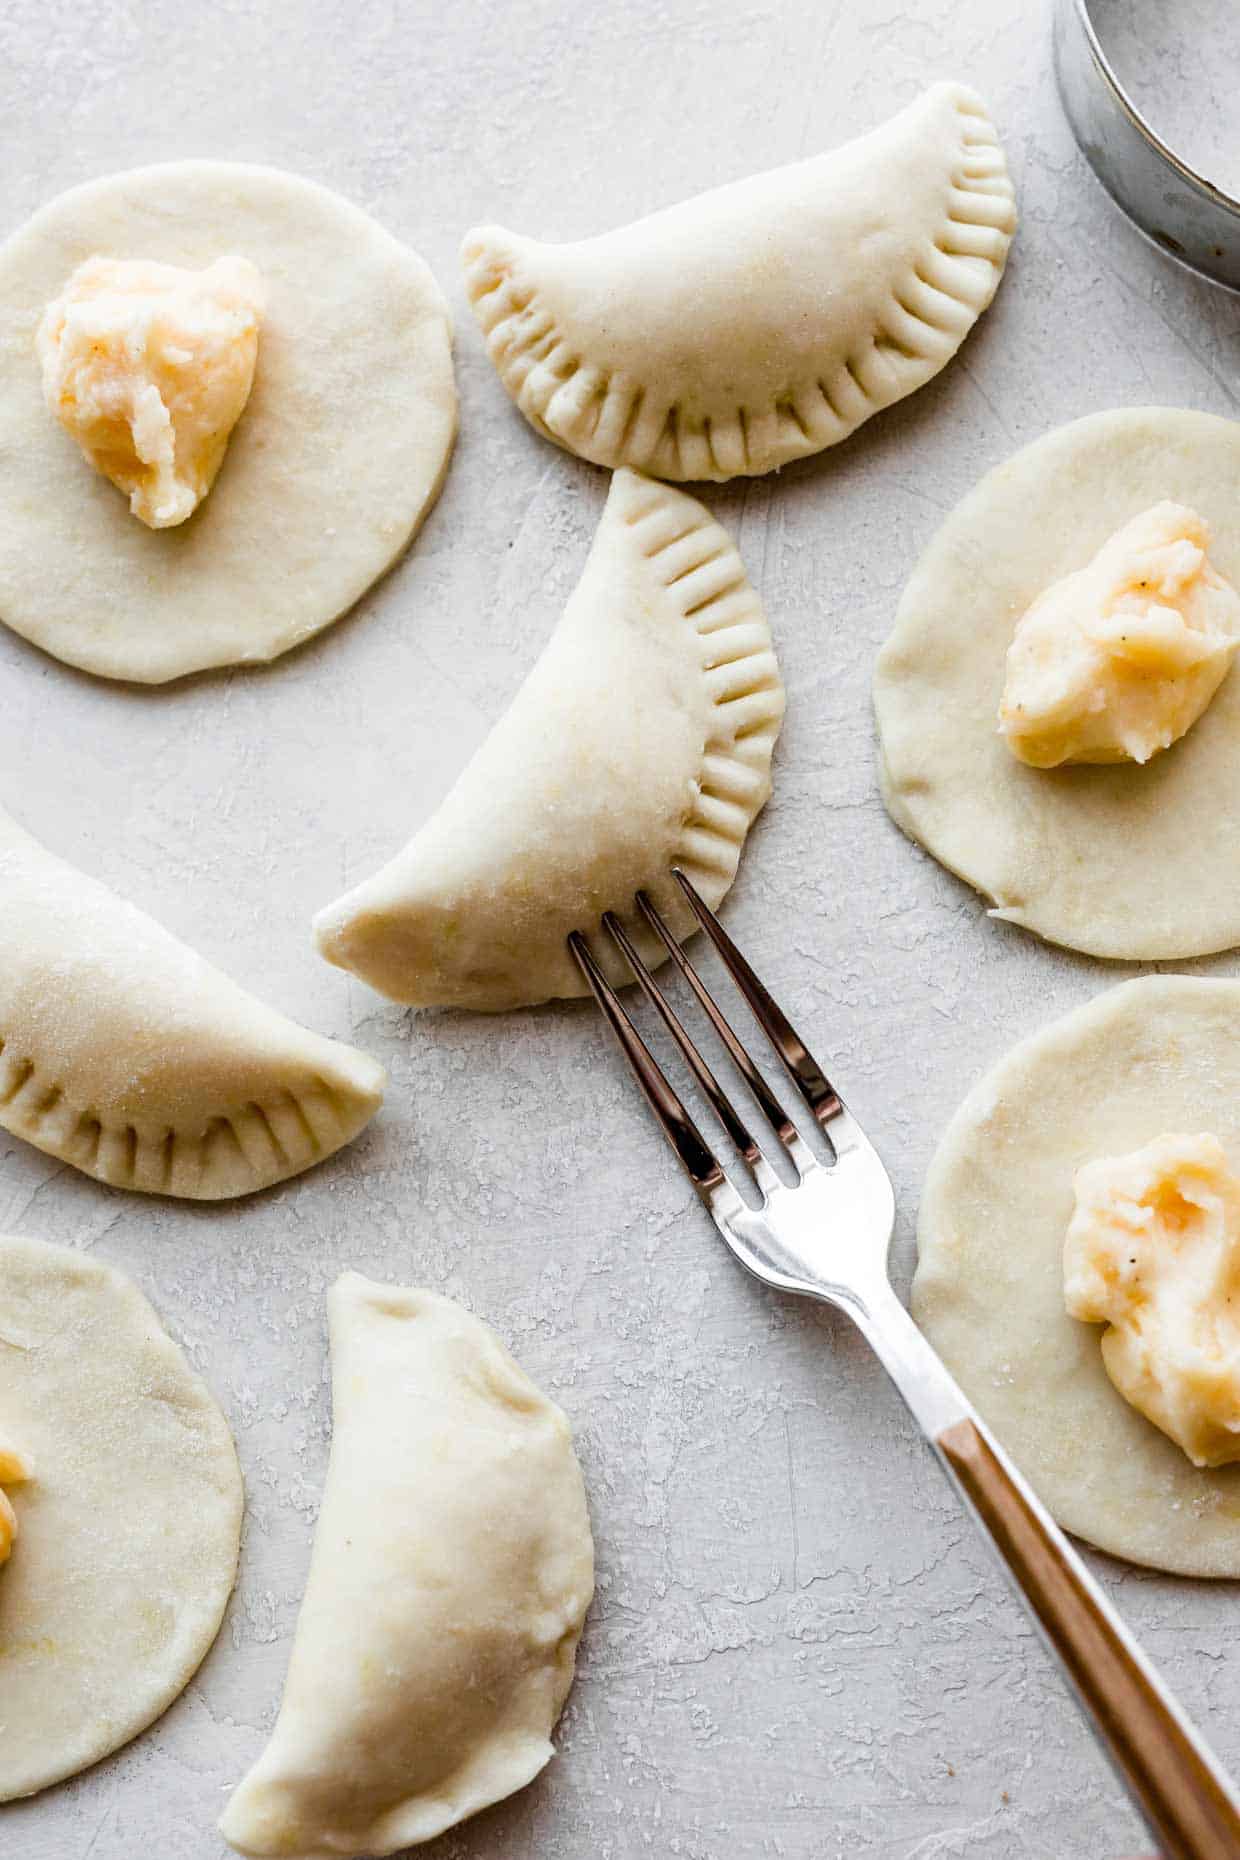 Pierogie dough made with sour cream, shaped into pierogies with a forks tines pressing into the outside edges.